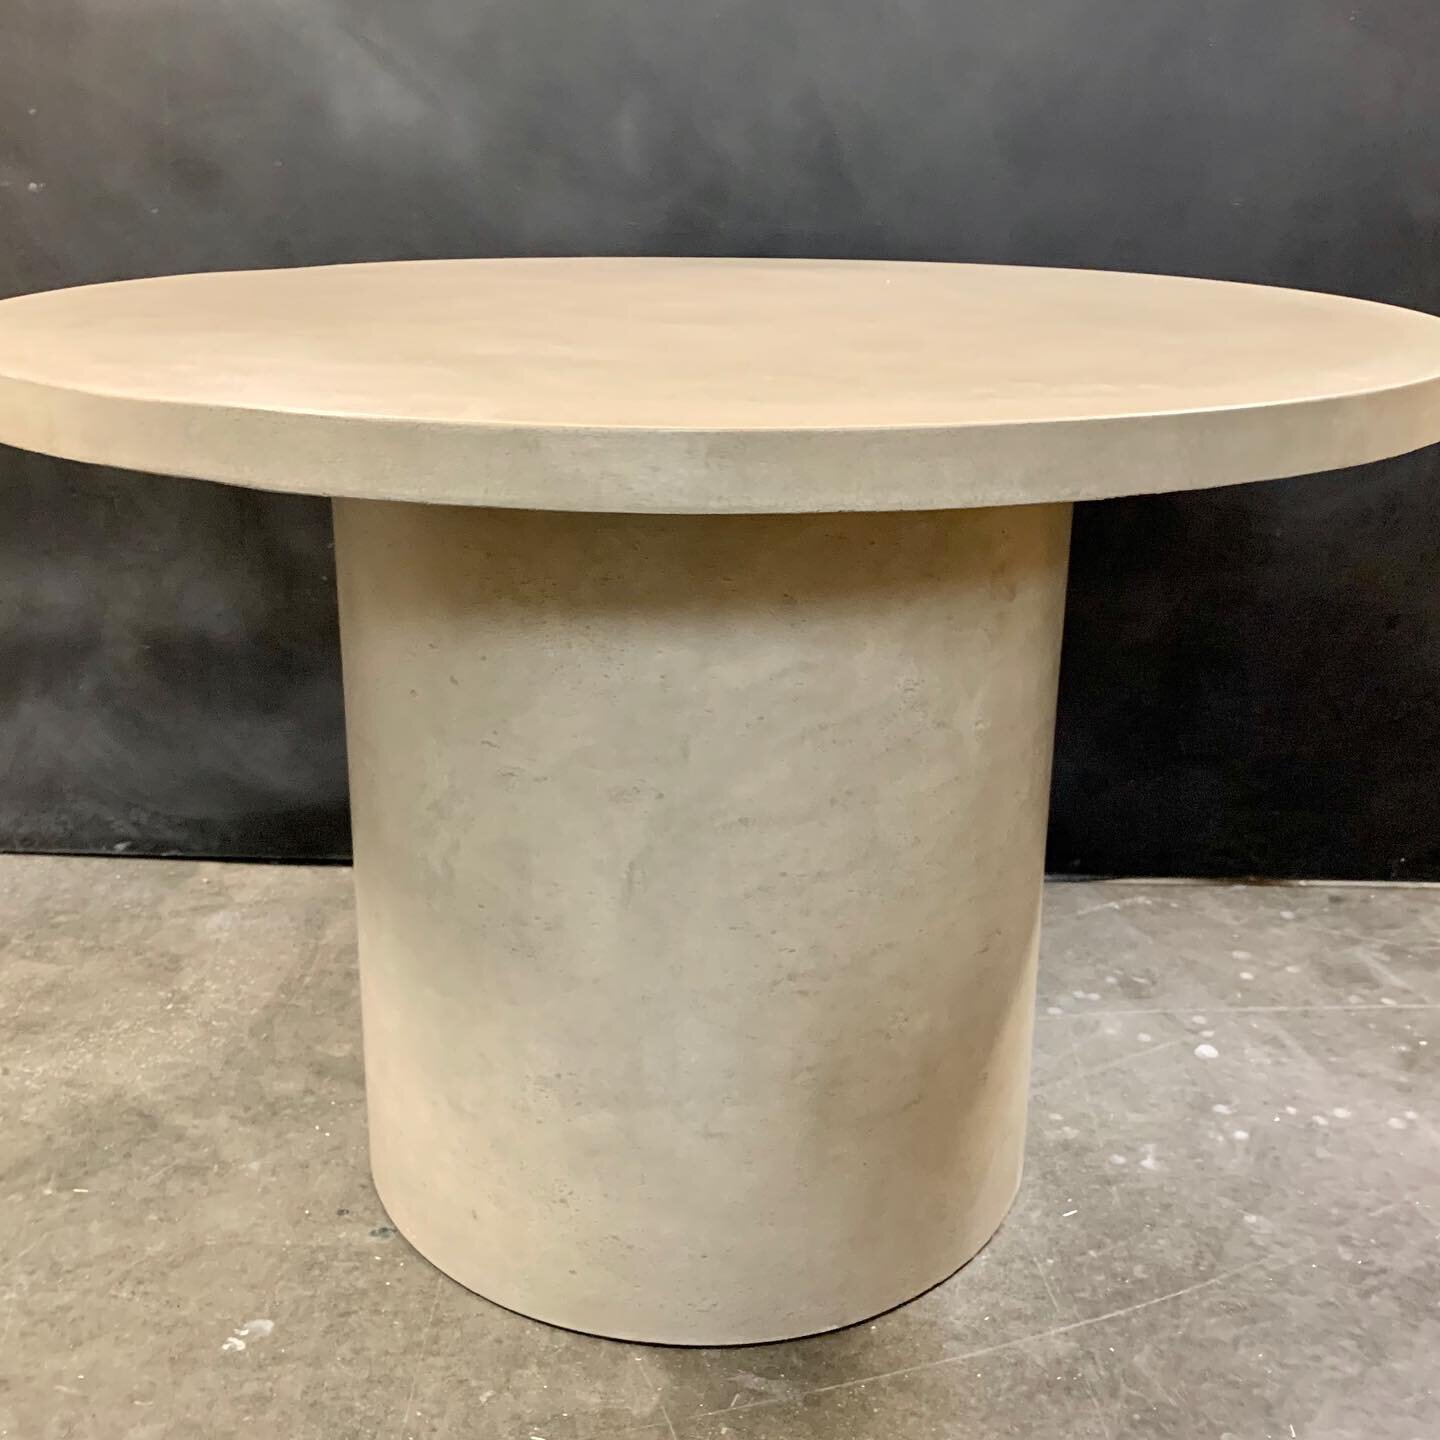 Natural gray concrete table available in all shapes,sizes and colors. #indooroutdoorfurniture #concretetable #diningtable #concretefurniture #customtable #outdoorfurniture #modernfurniture #modernfarmhouse #farmtable #concretedesign #stogsconcretedes